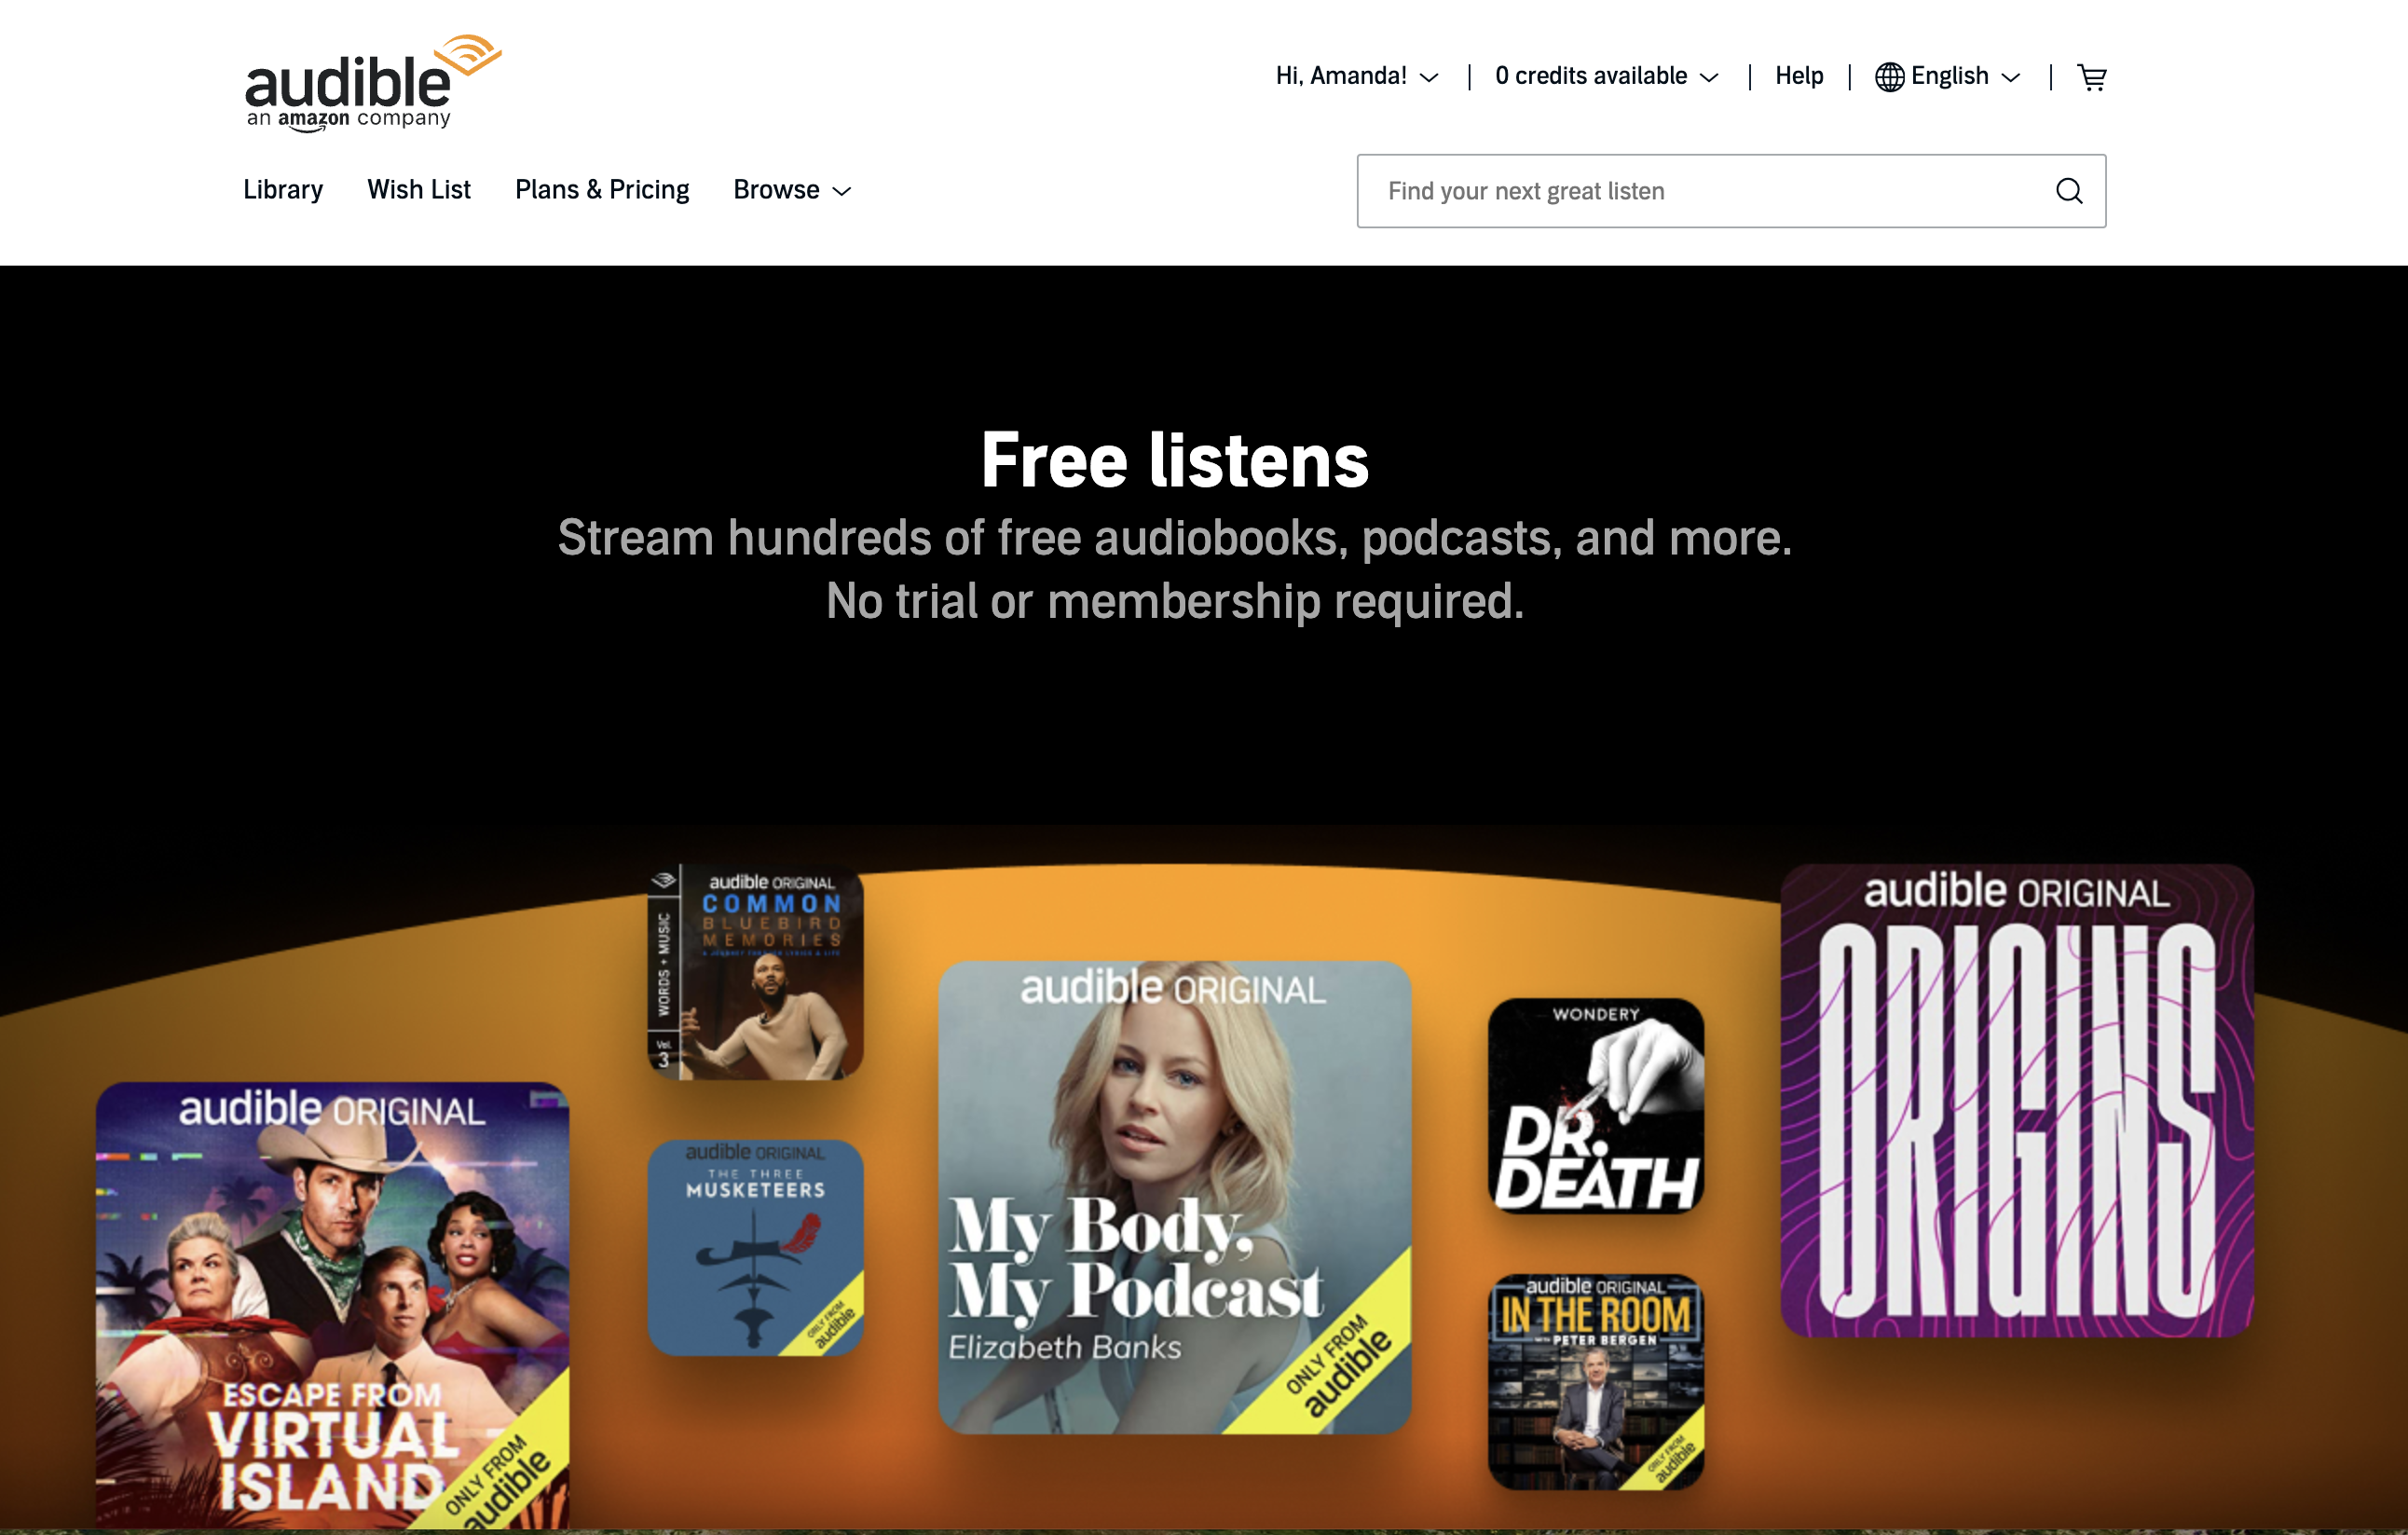 Free Listens audible page showing lots of options